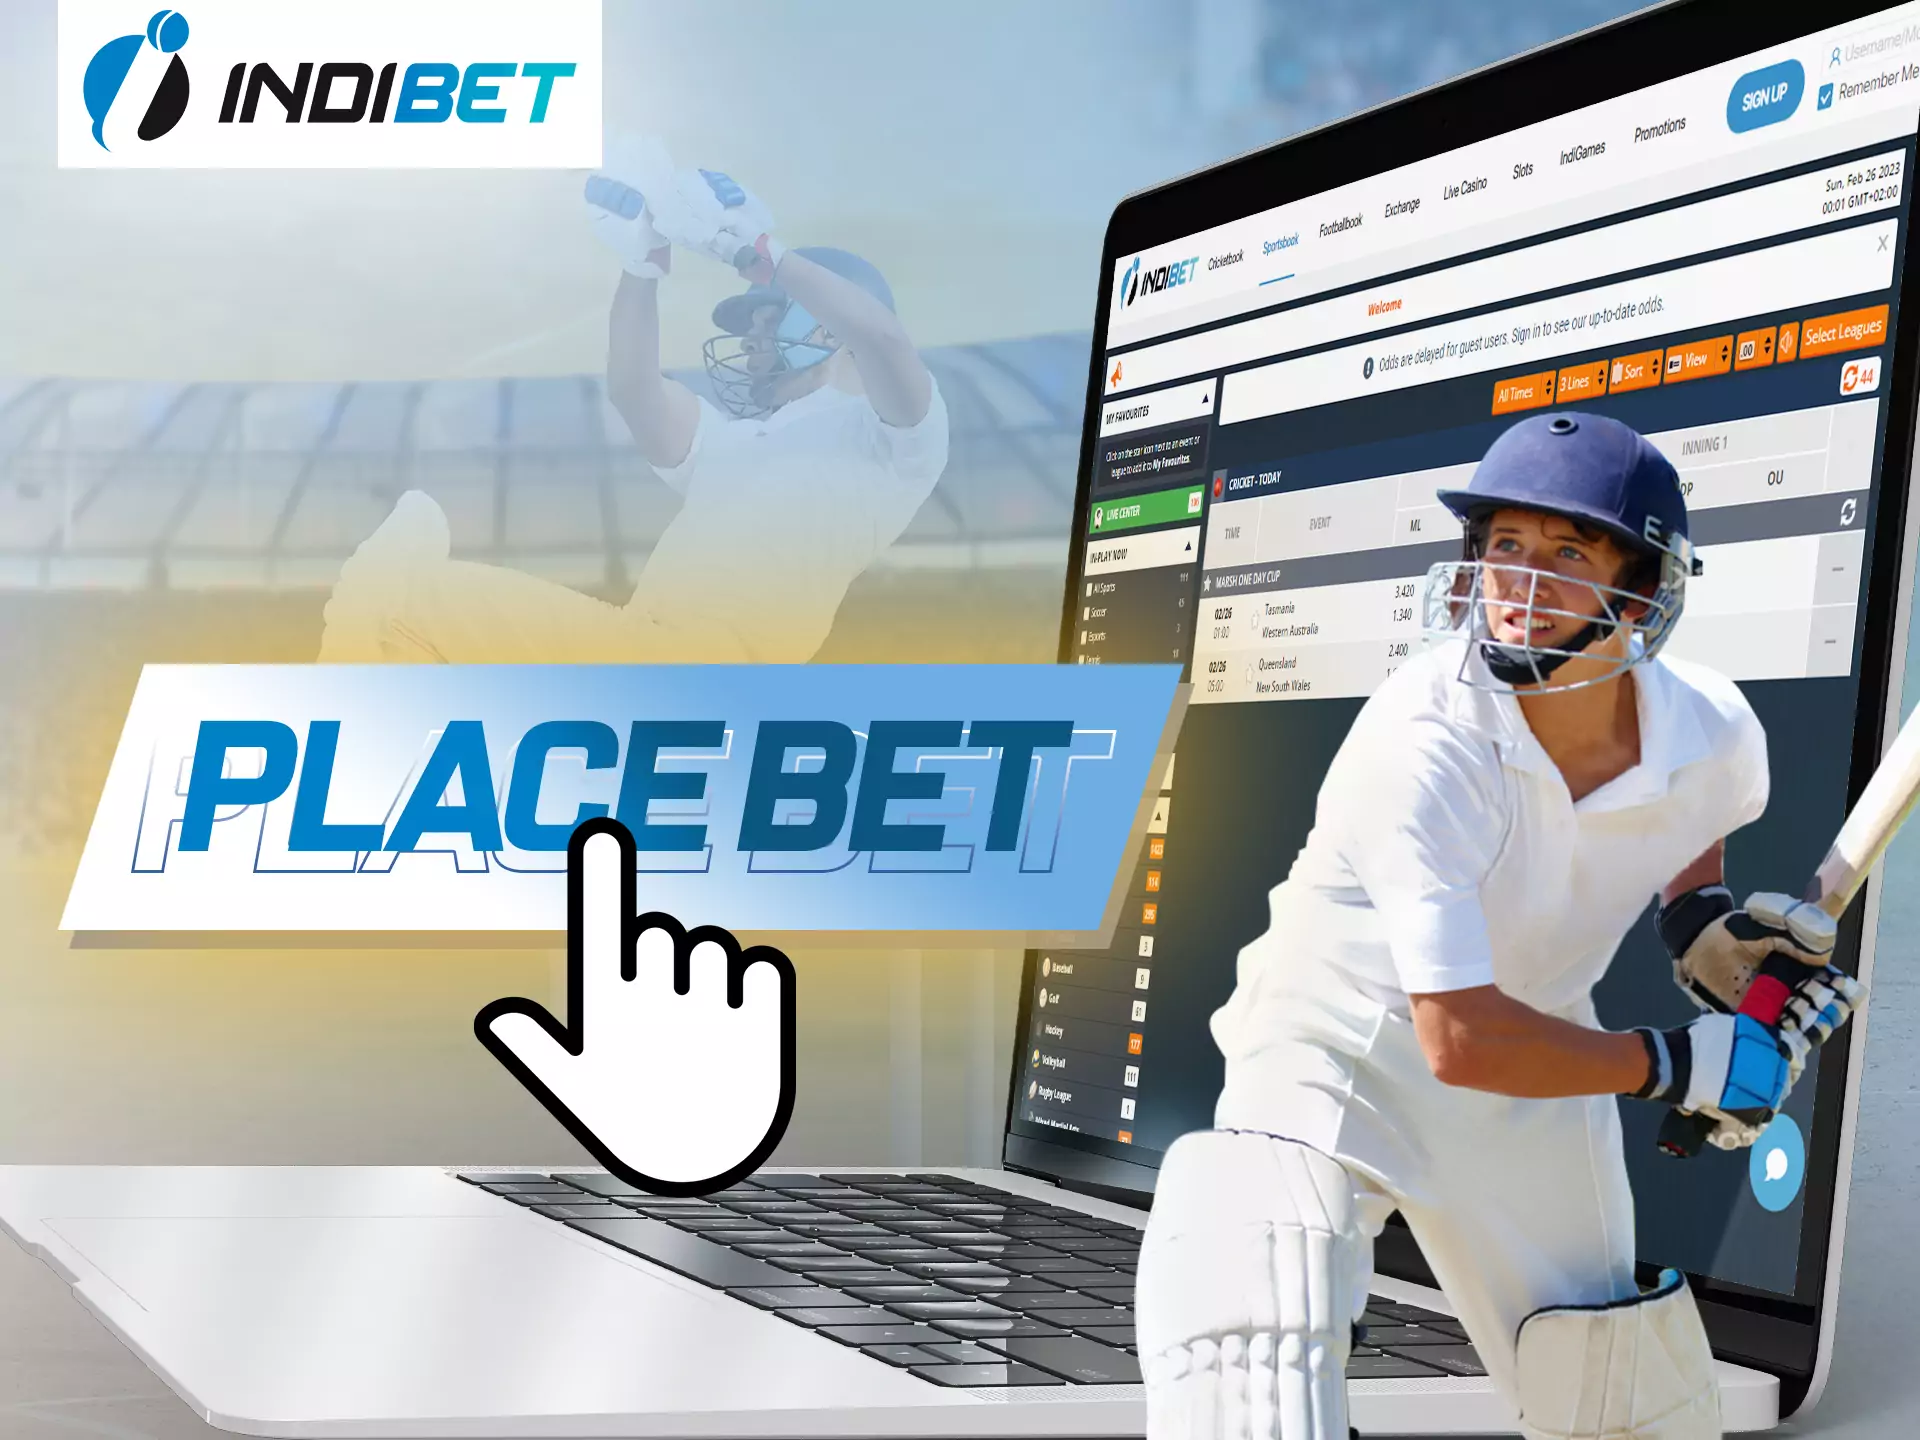 With these instructions, learn how easy it is to bet on Indibet.